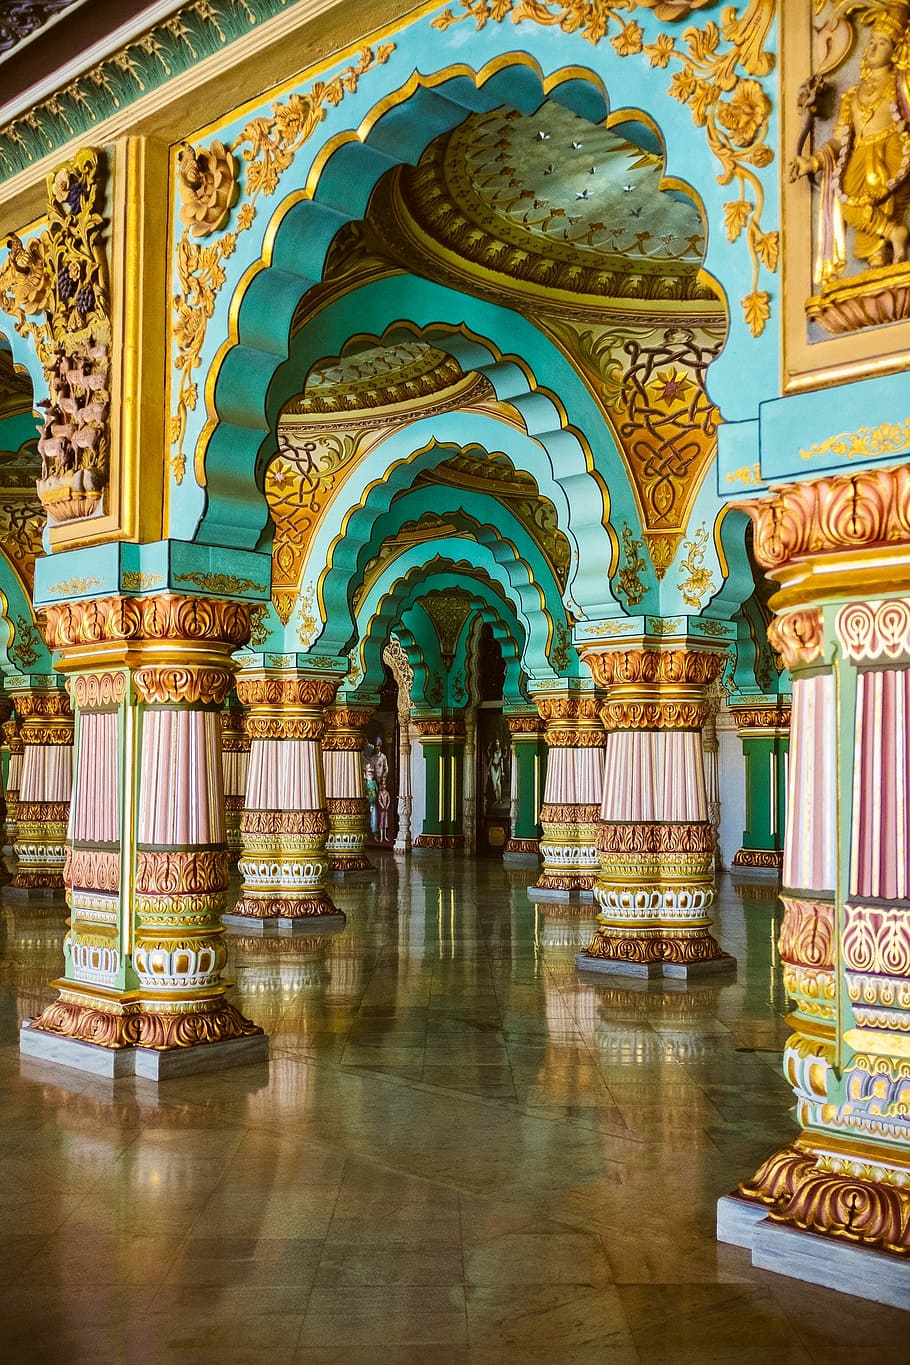 blue, yellow, and brown concrete structure, teal, gold-colored and red temple interior